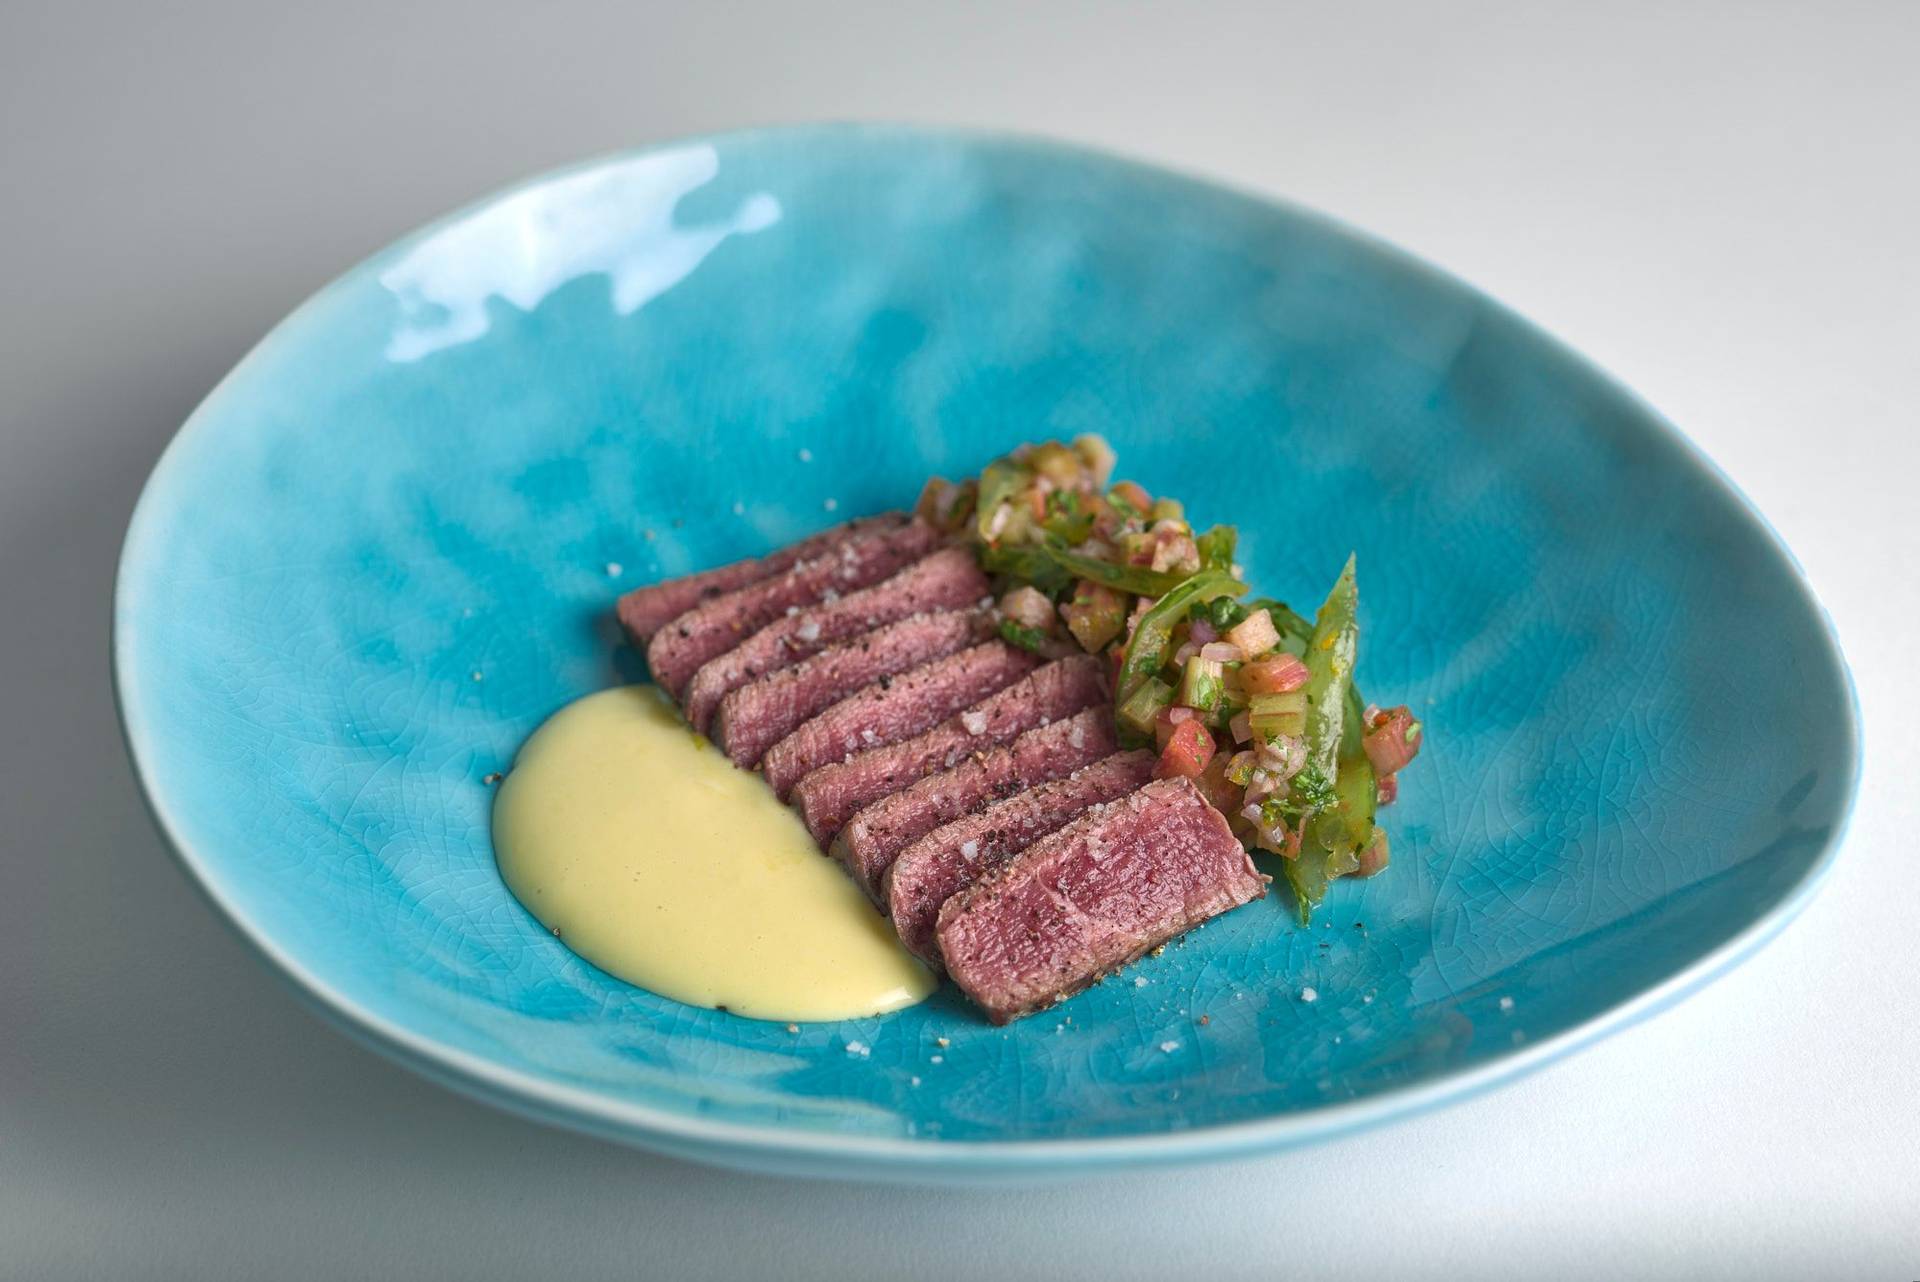 beef tataki with tomato salsa and ginger mayonnaise on a turquoise plate with white background